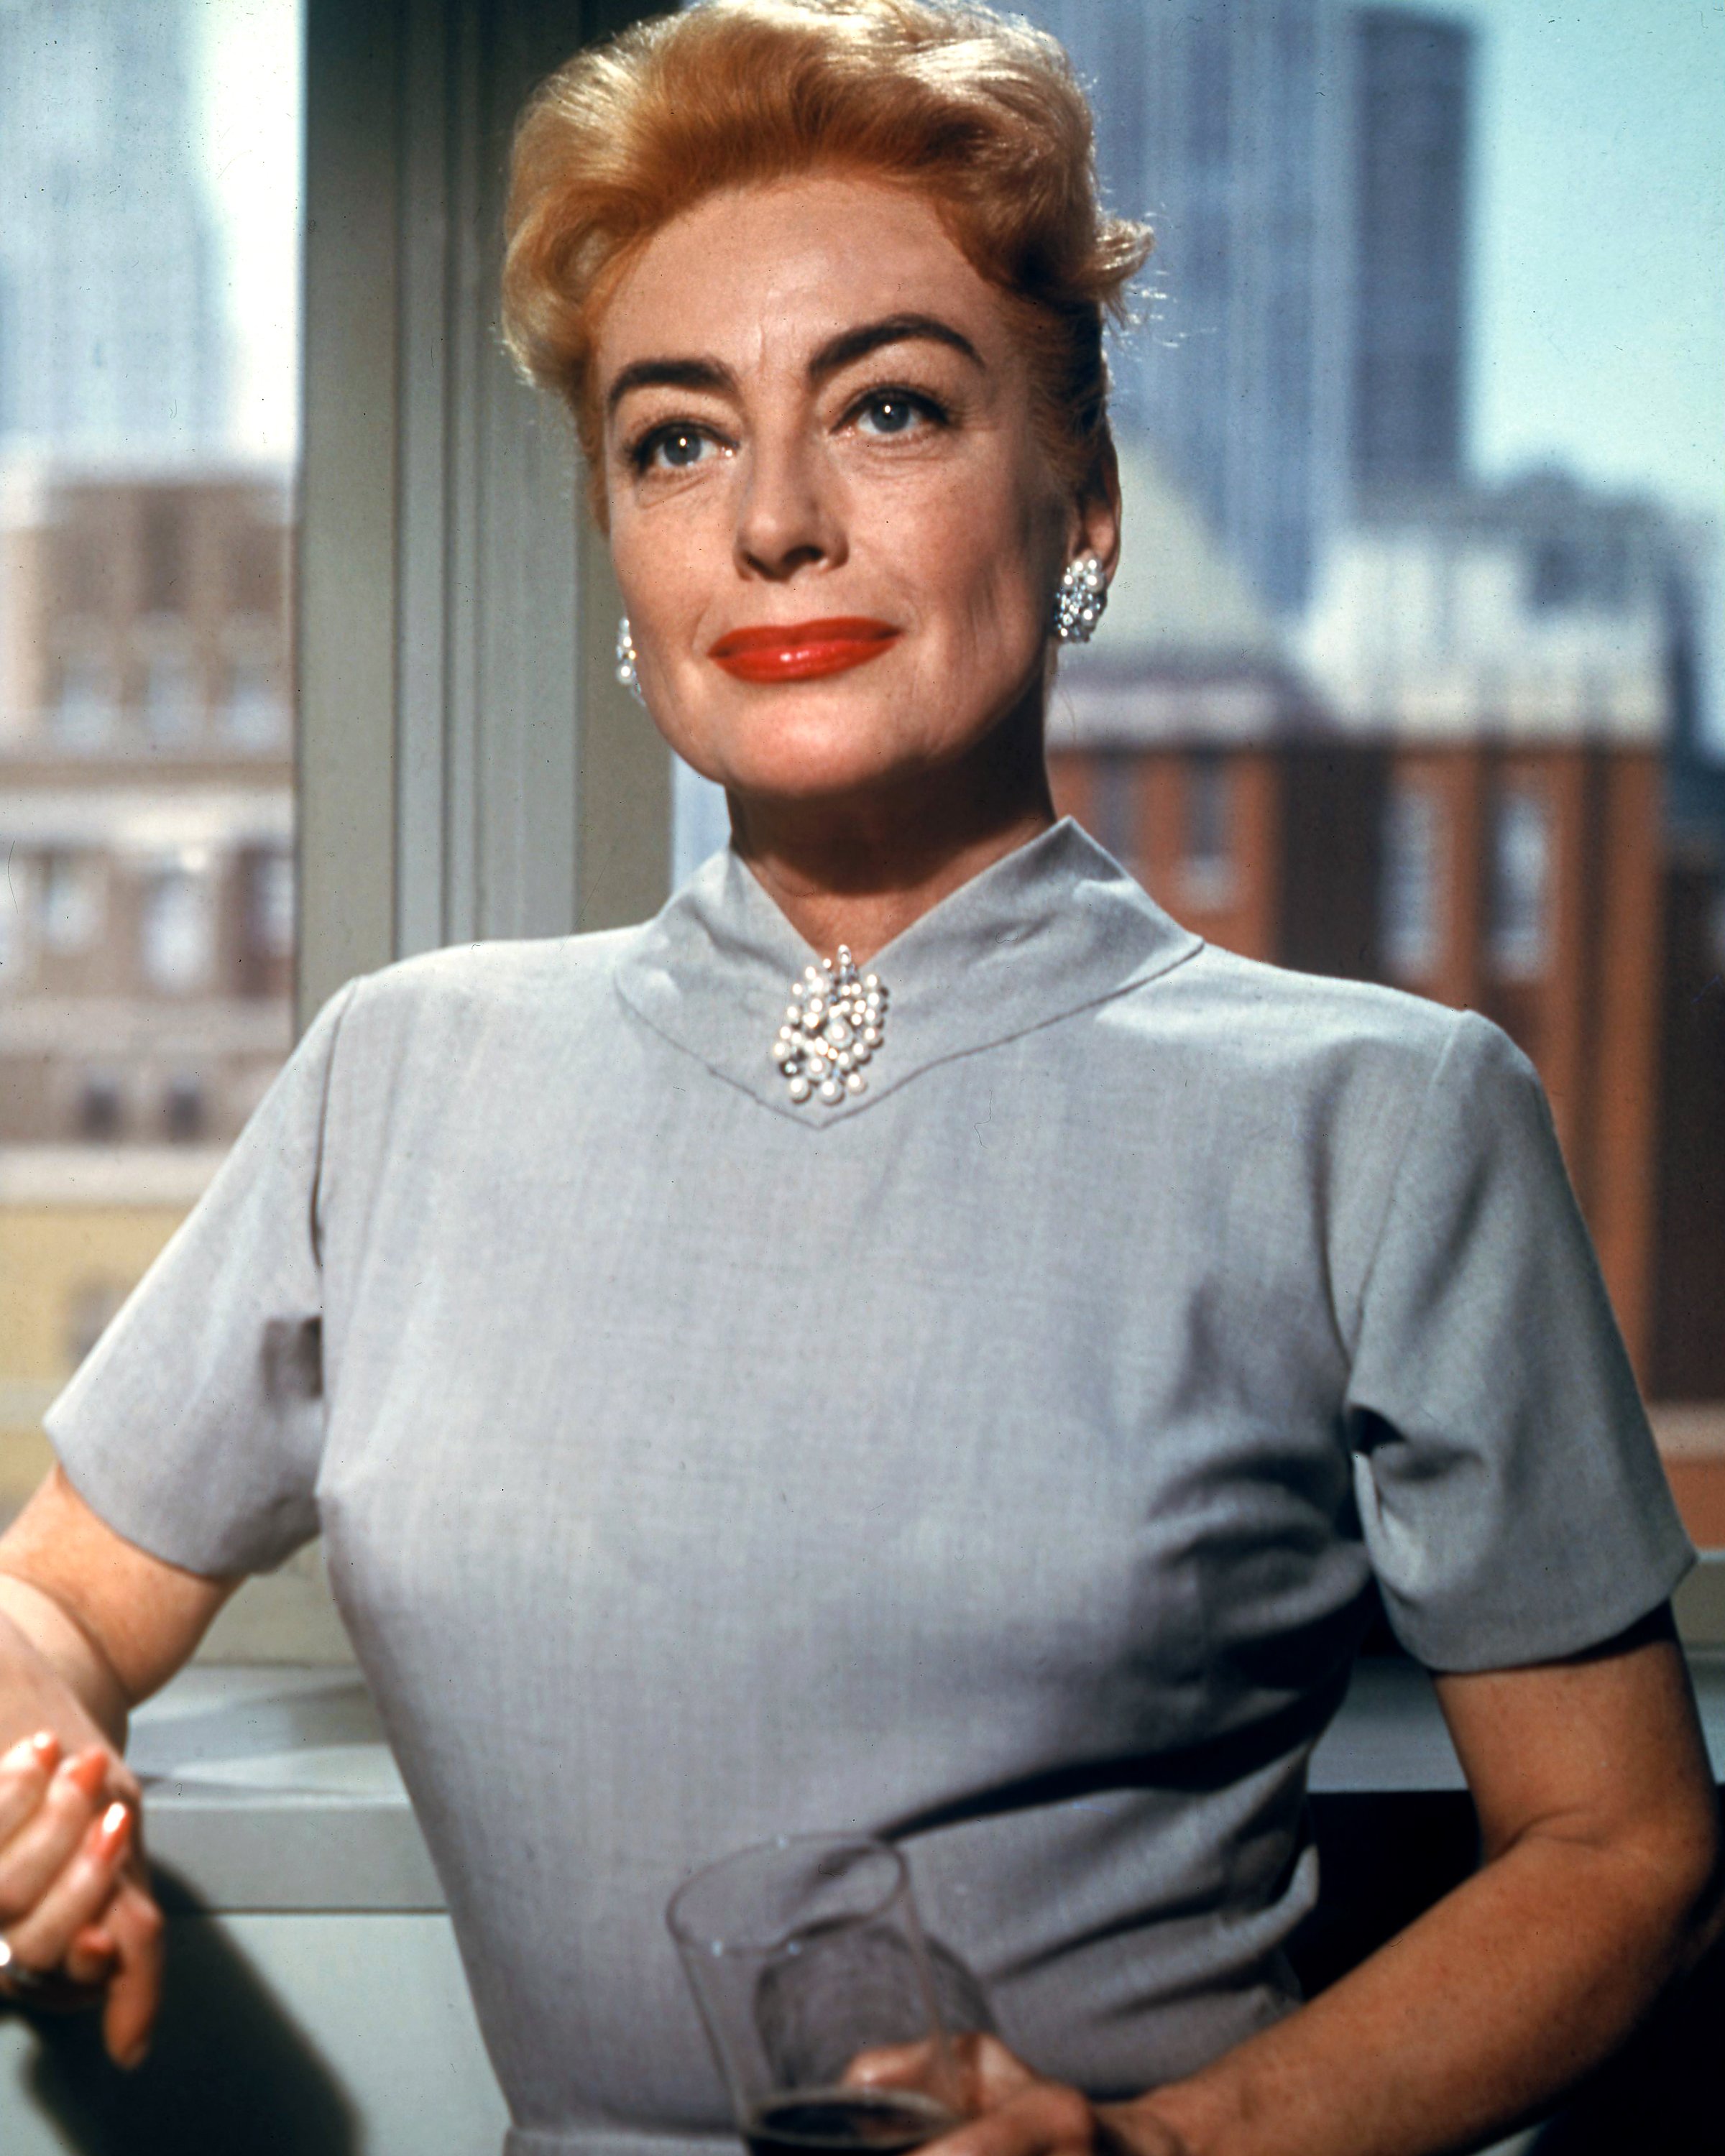 American actress Joan Crawford (1905 - 1977) in a promotional still from 'The Best Of Everything', directed by Jean Negulesco, 1959. | Photo: Getty Images